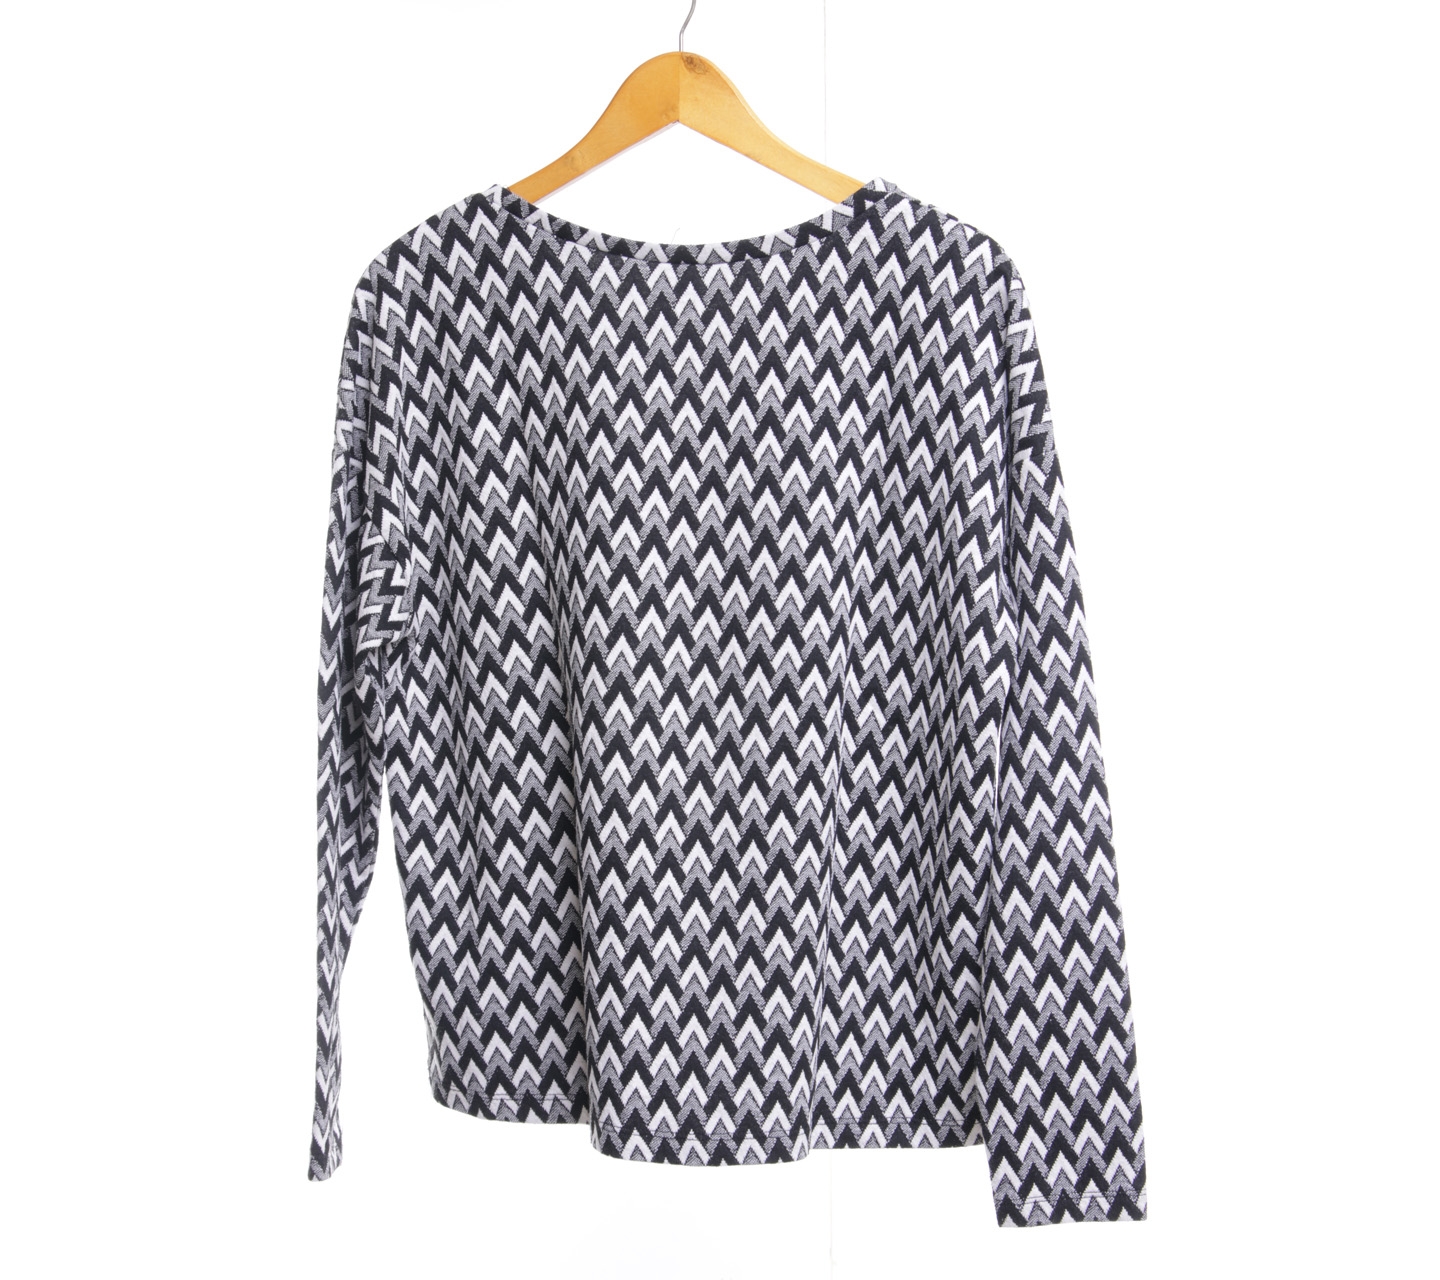 H&M Black And Grey Patterned Blouse